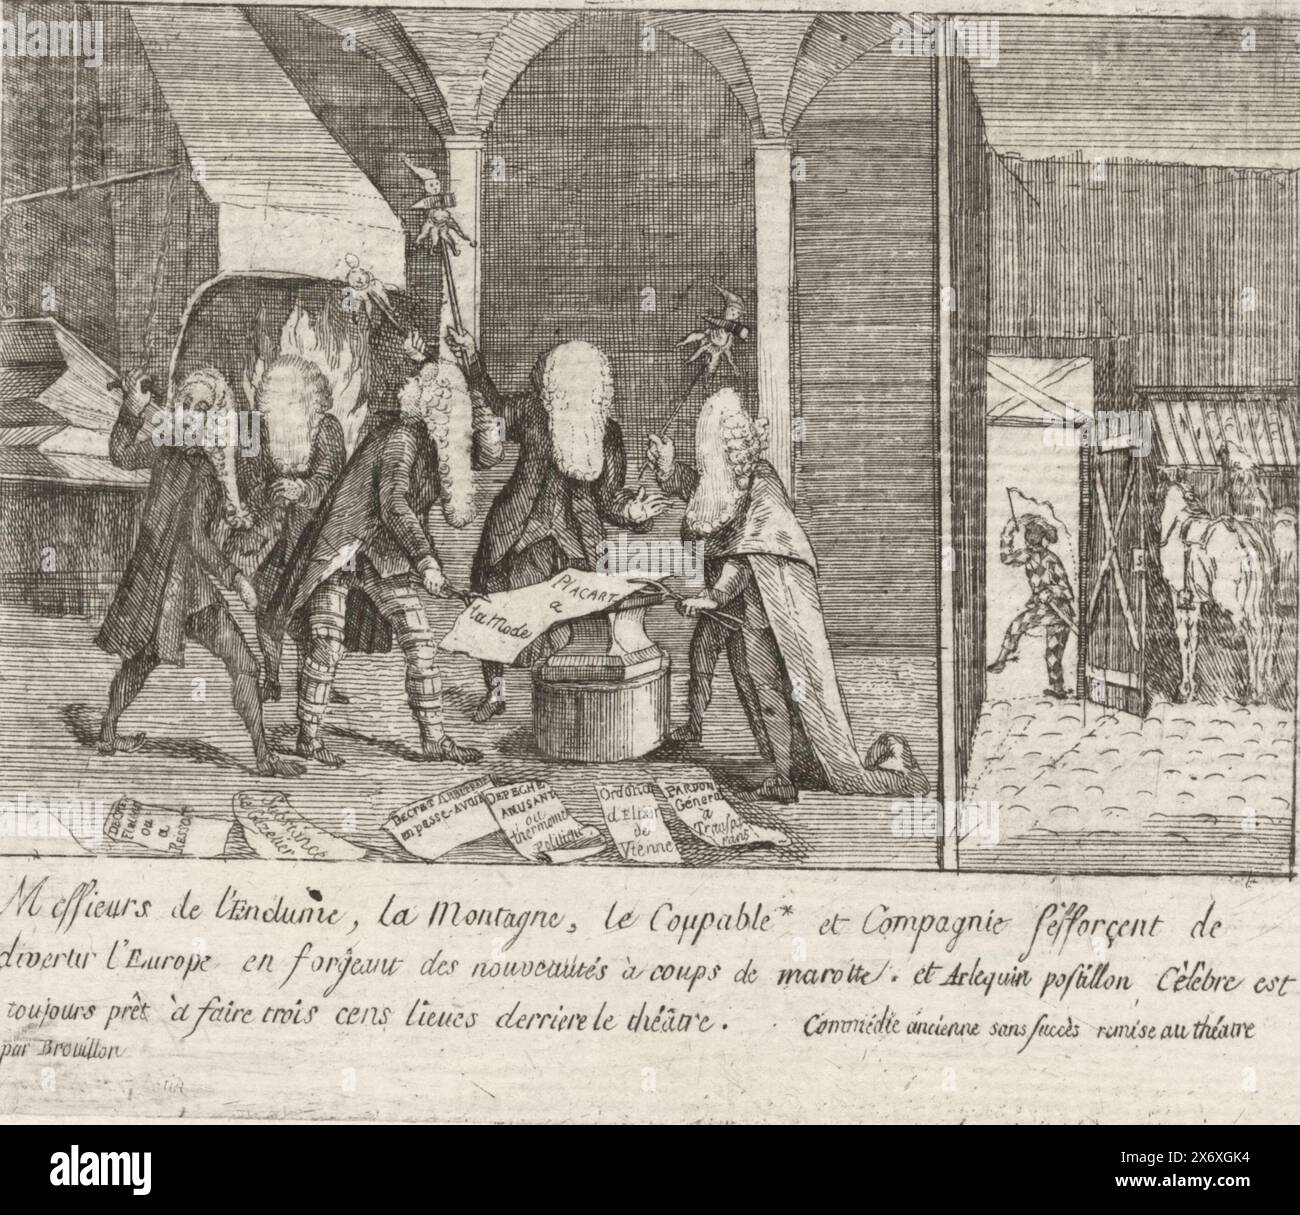 Forging the placard, Brabant Revolution, 1787-1790 (series title), Cartoon in which three men with large wigs and turned away heads forge a placard on an anvil. There are more documents on the floor. With 3-line caption in French. Part of a large group of prints relating to the events of the Brabant Revolution and the period 1787-1790., print, print maker: anonymous, Southern Netherlands, 1787 - 1790, paper, etching, height, 116 mm × width, 139 mm Stock Photo